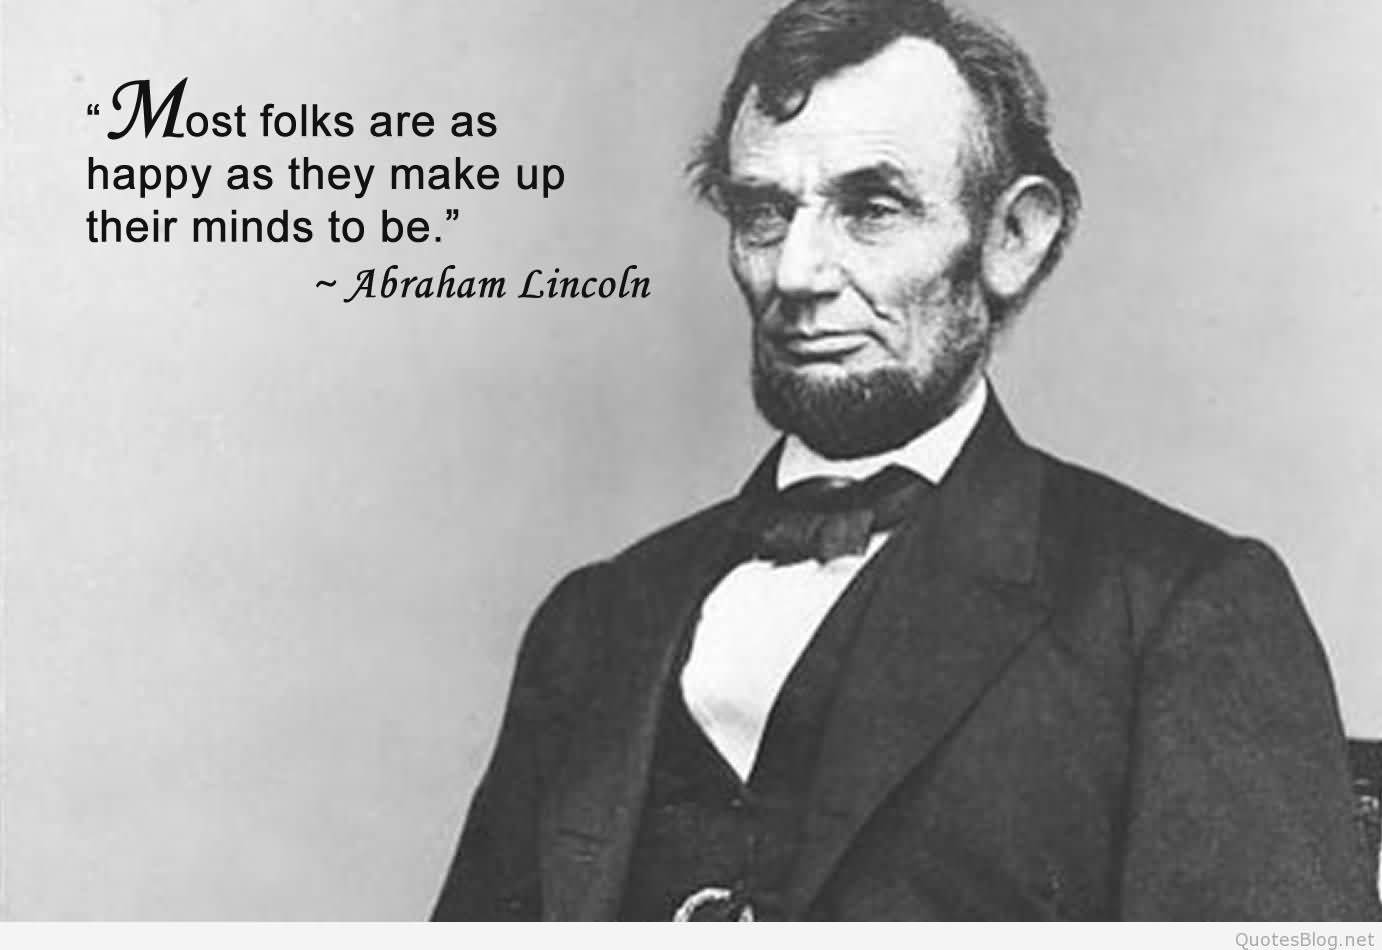 Abraham Lincoln Quotes On Life 05